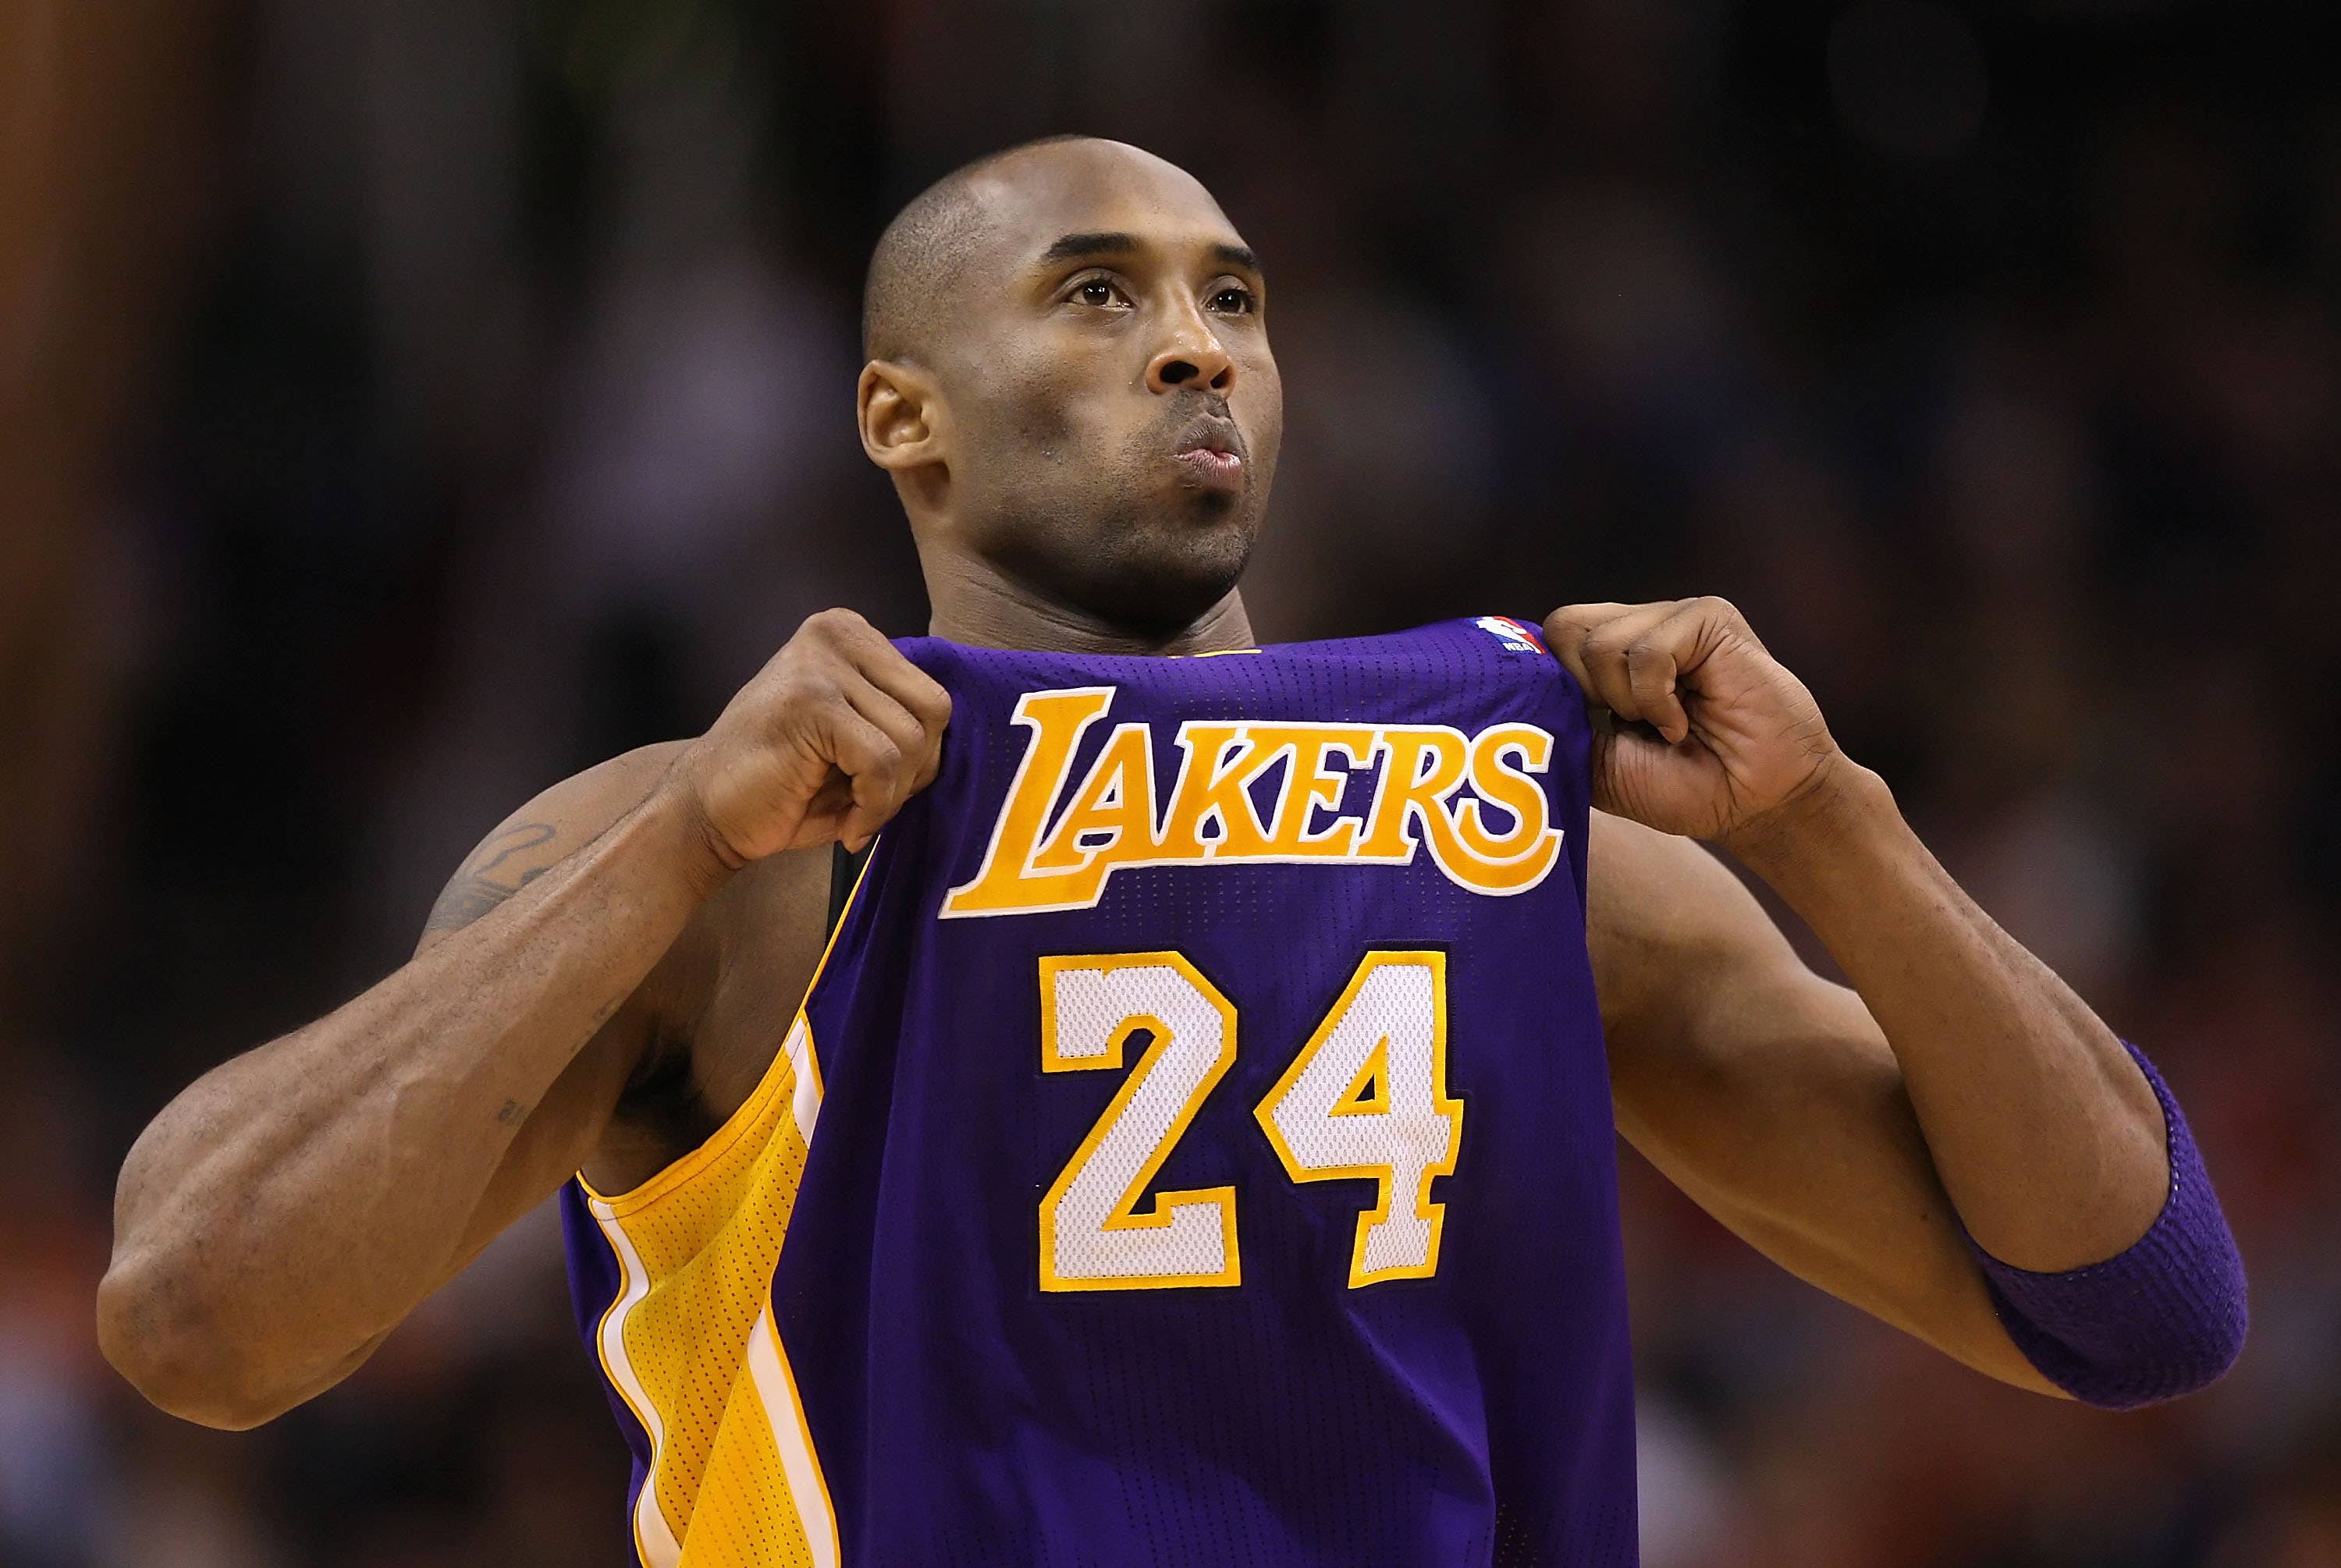 Kobe Bryant, Dirk Nowitzki and Udonis Haslem? Here's what they have in  common